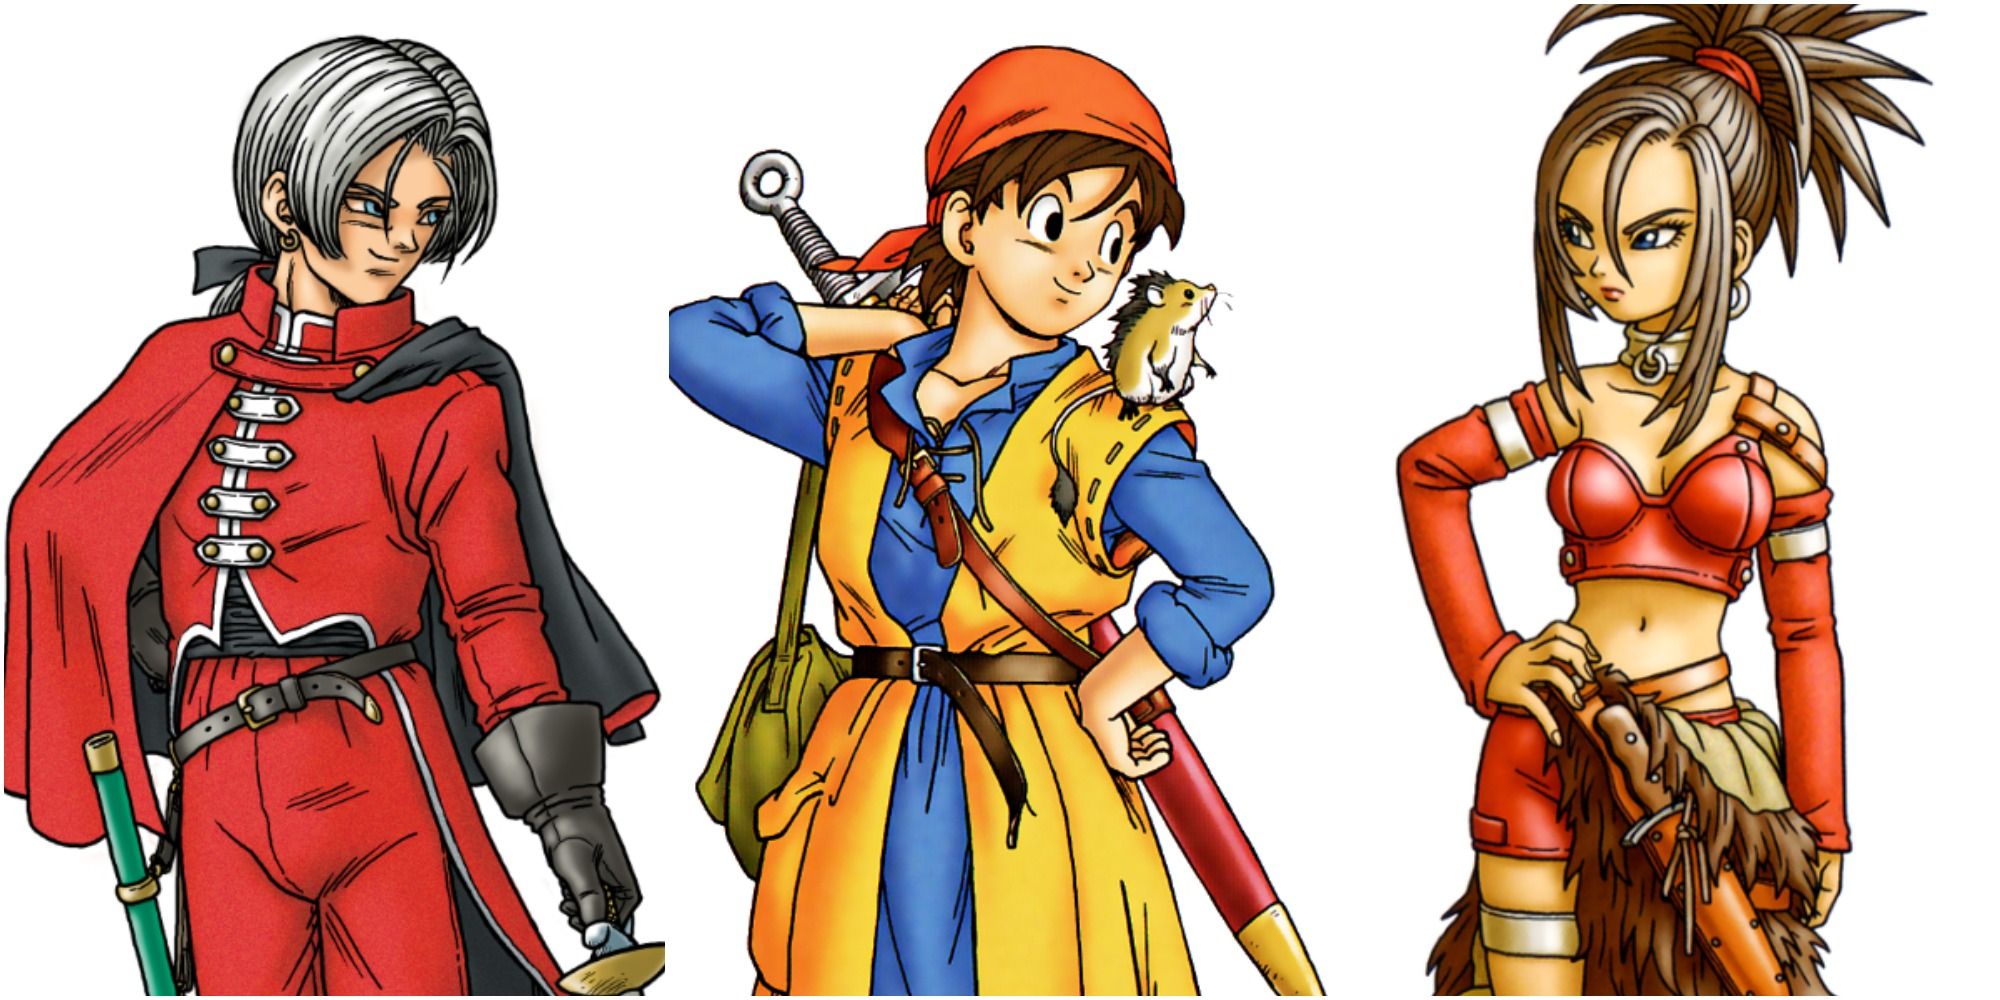 How Long Does It Take To Beat Dragon Quest 8?